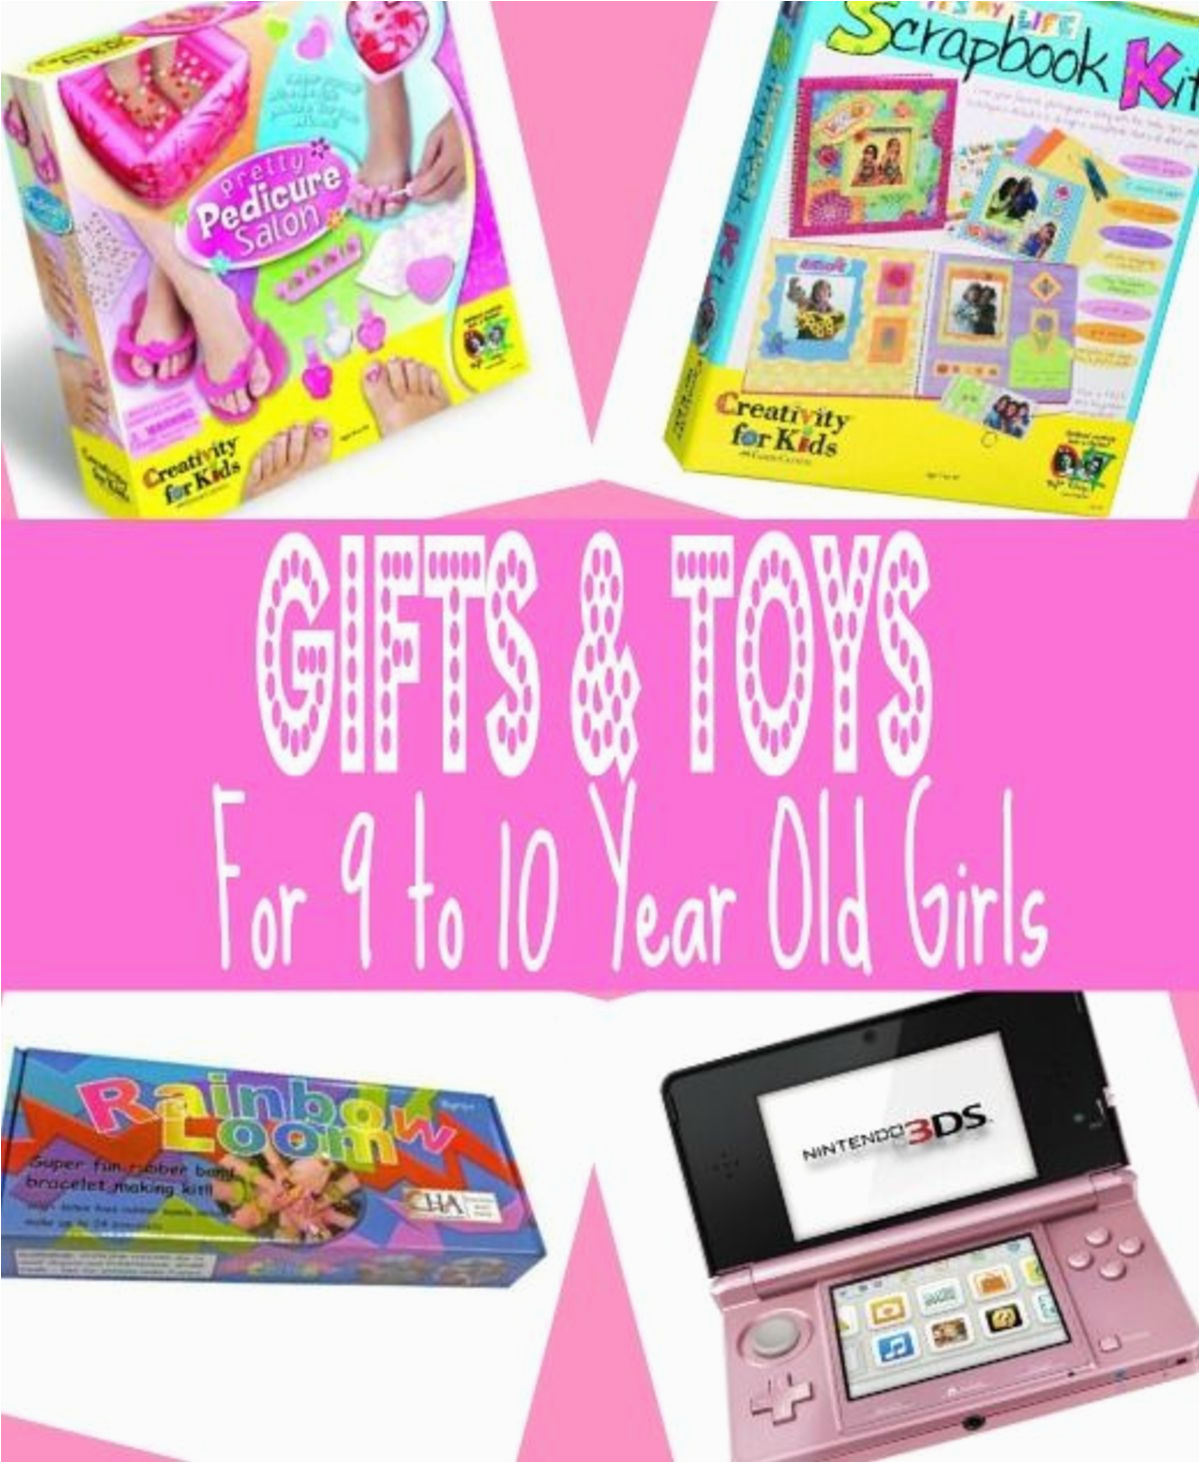 vzl best unique gift ideas for a 9 year old girl reviews and ratings